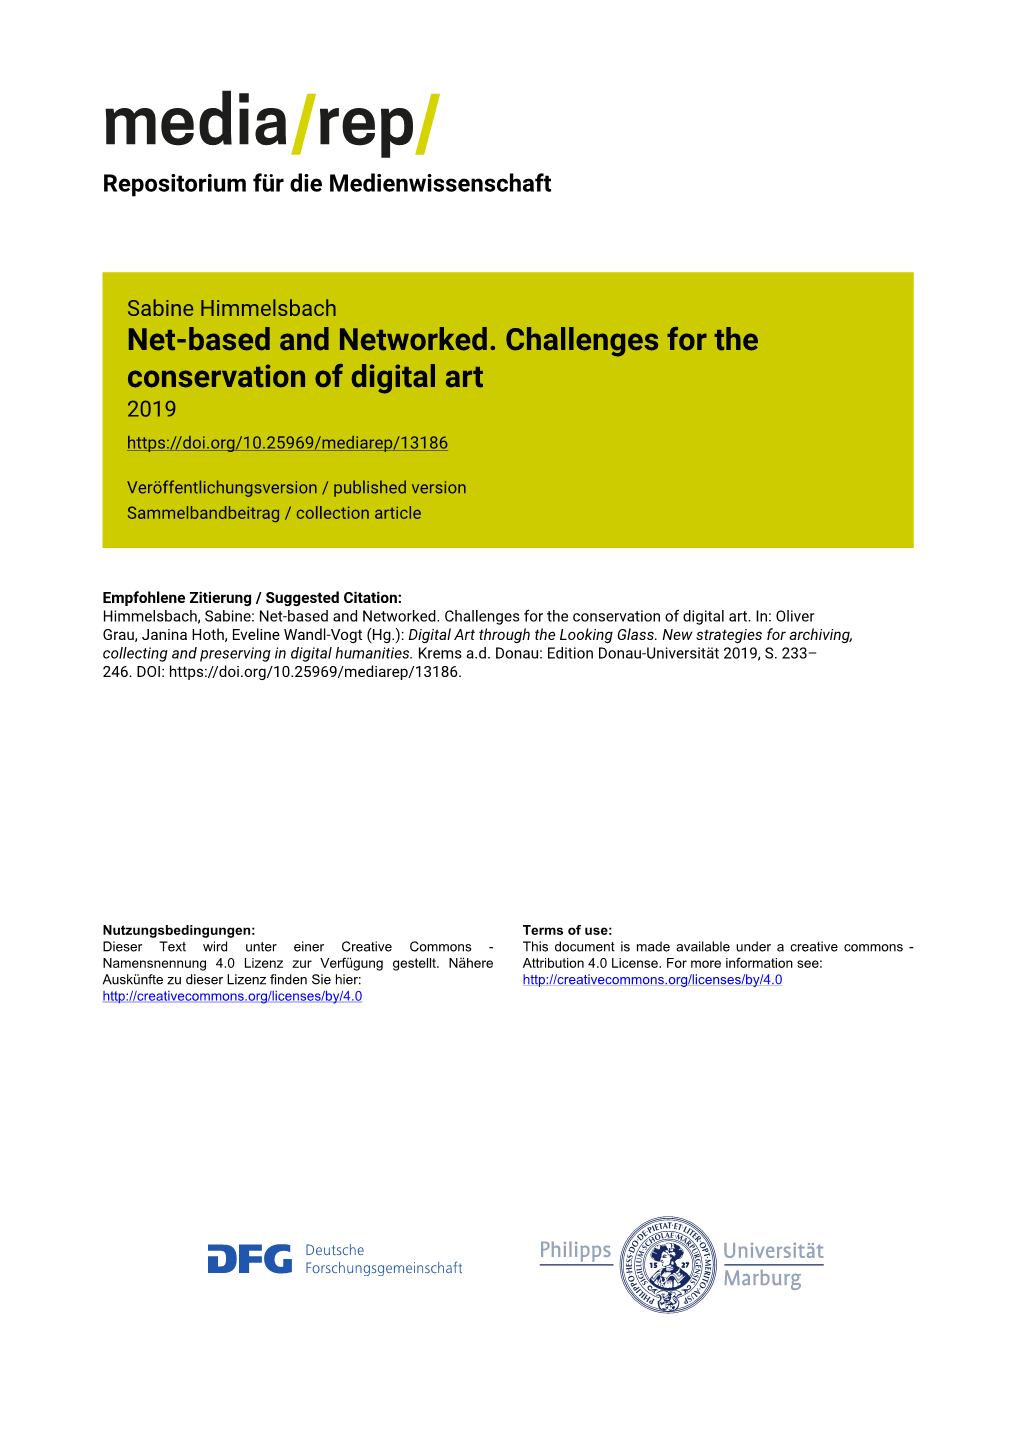 Net-Based and Networked. Challenges for the Conservation of Digital Art 2019